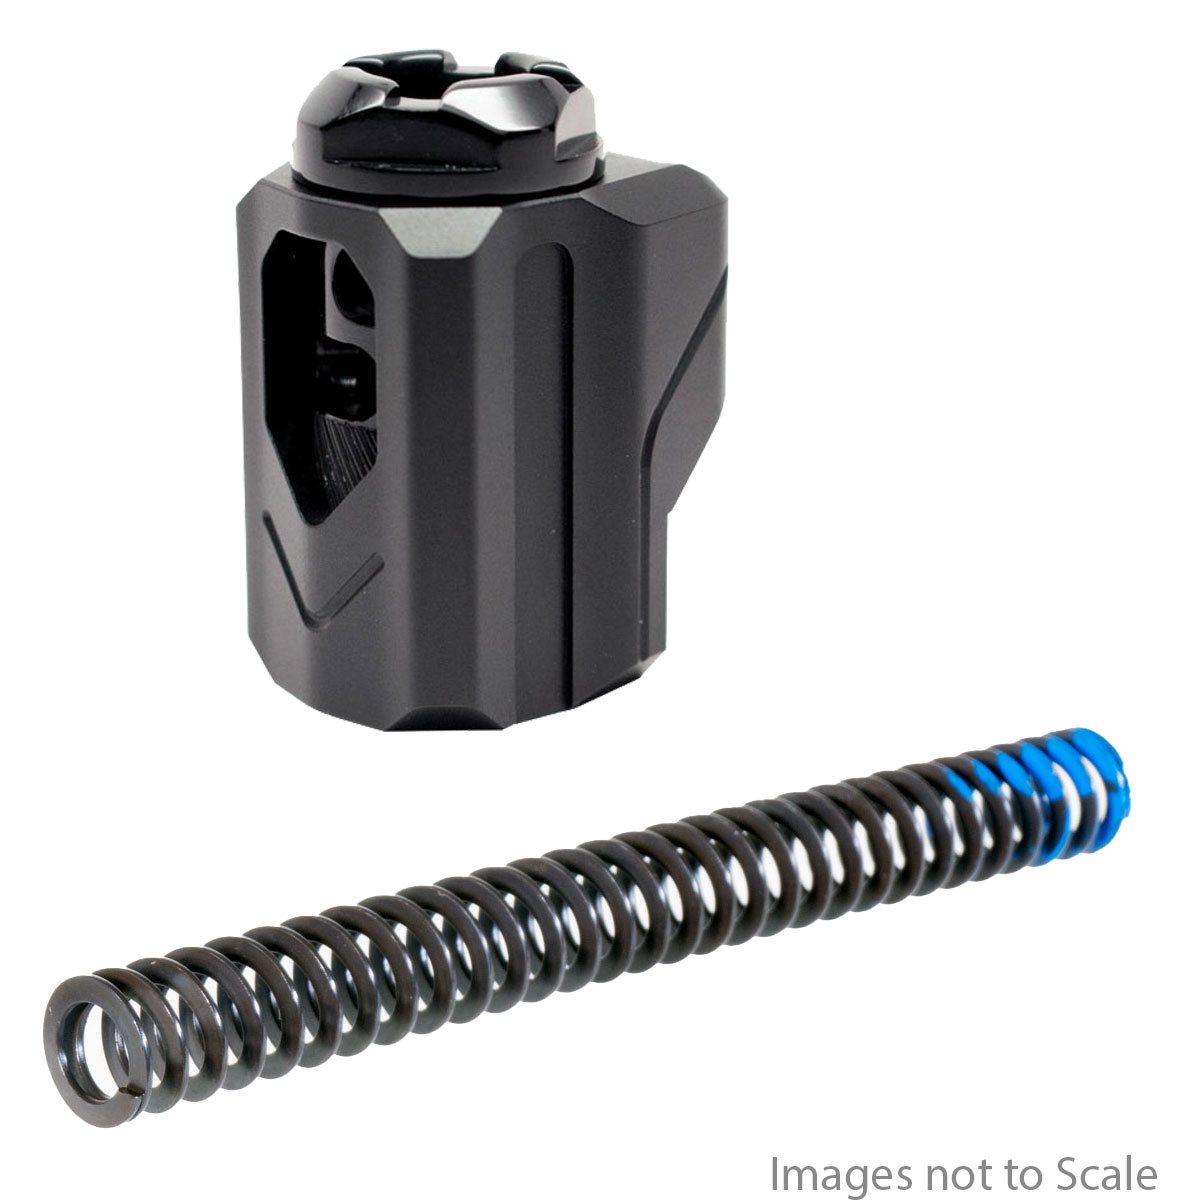 Compensator Kit: Lone Wolf 13 lb. Reduced Power Recoil Spring for Glock 19 + Tyrant Designs Universal Fit Compensator 9mm